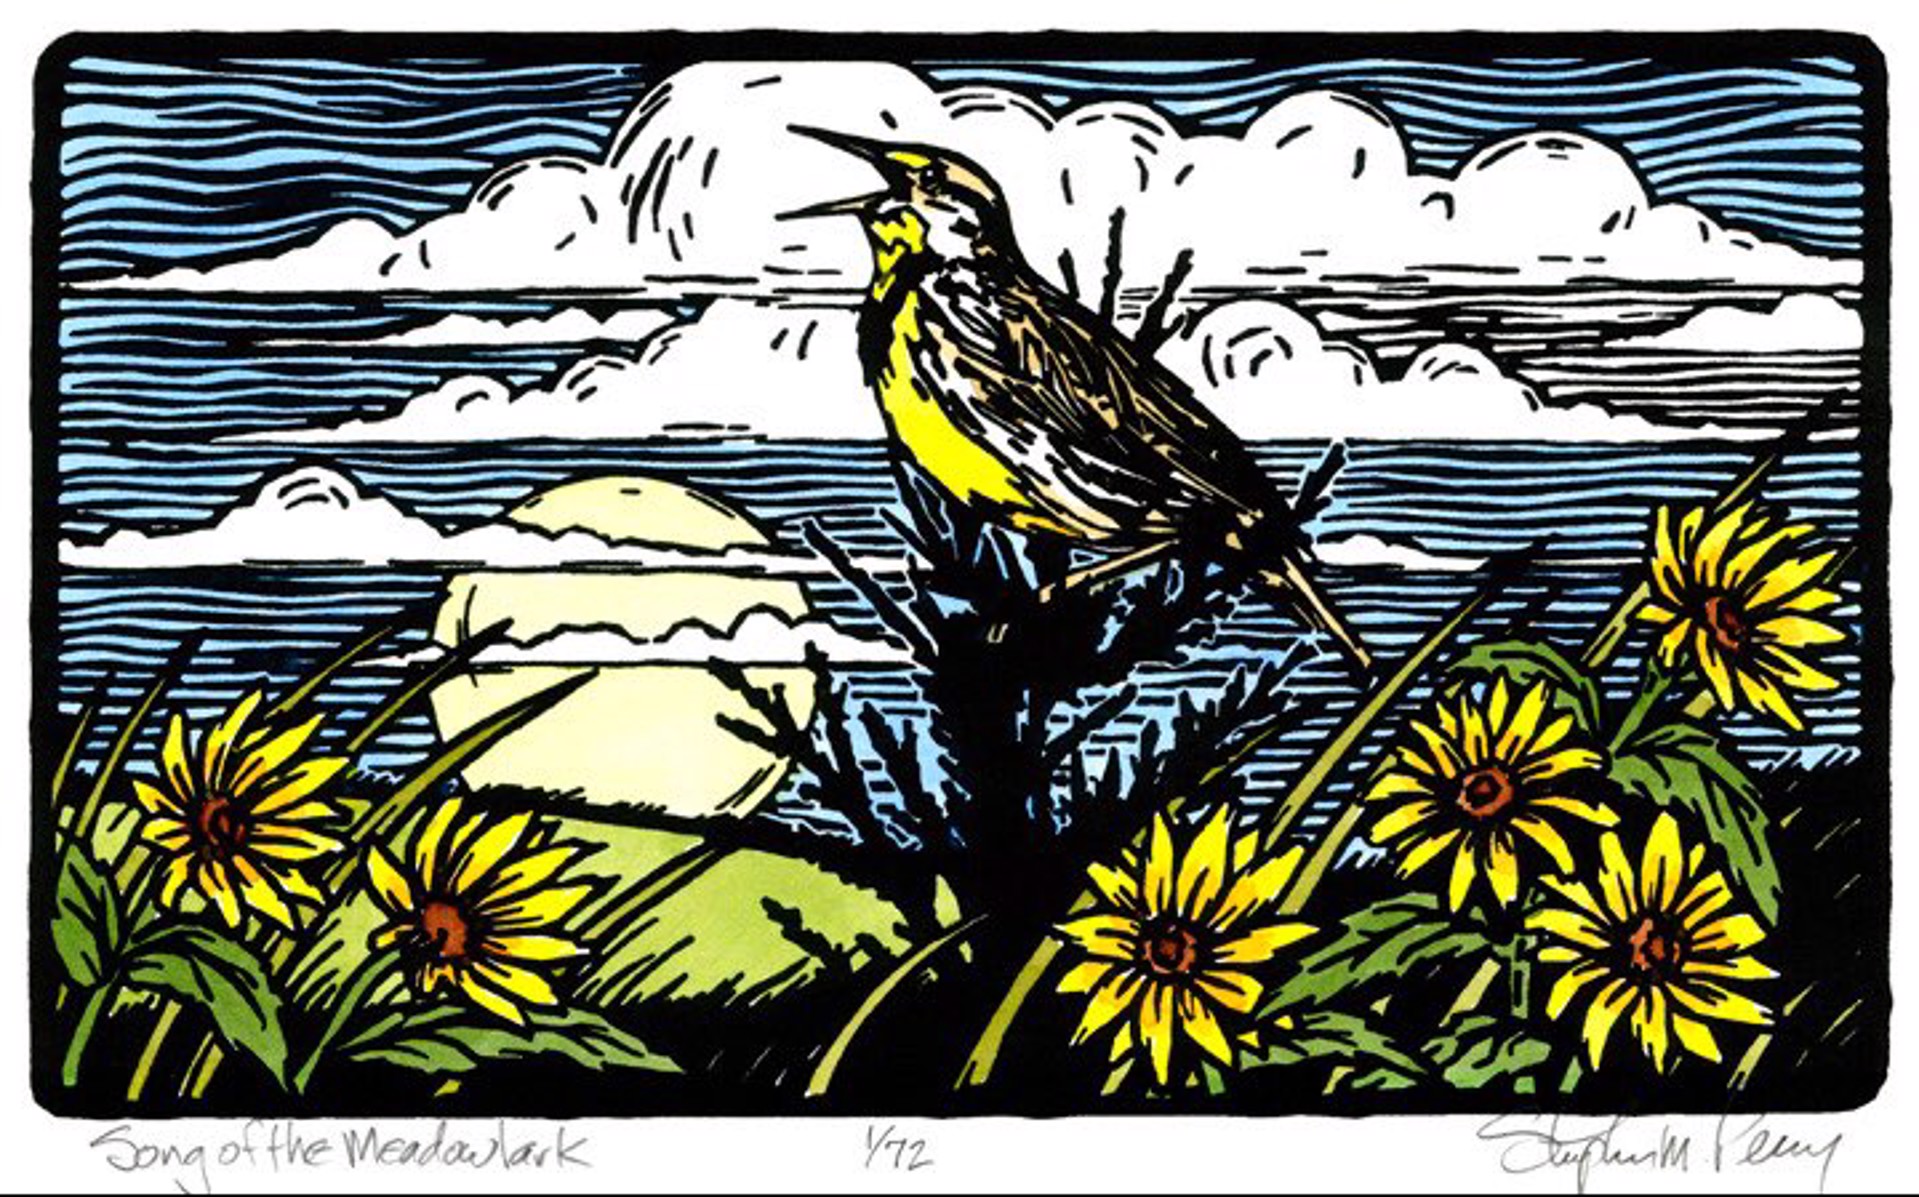 Song of the Meadowlark (42/72) by Stephen Perry